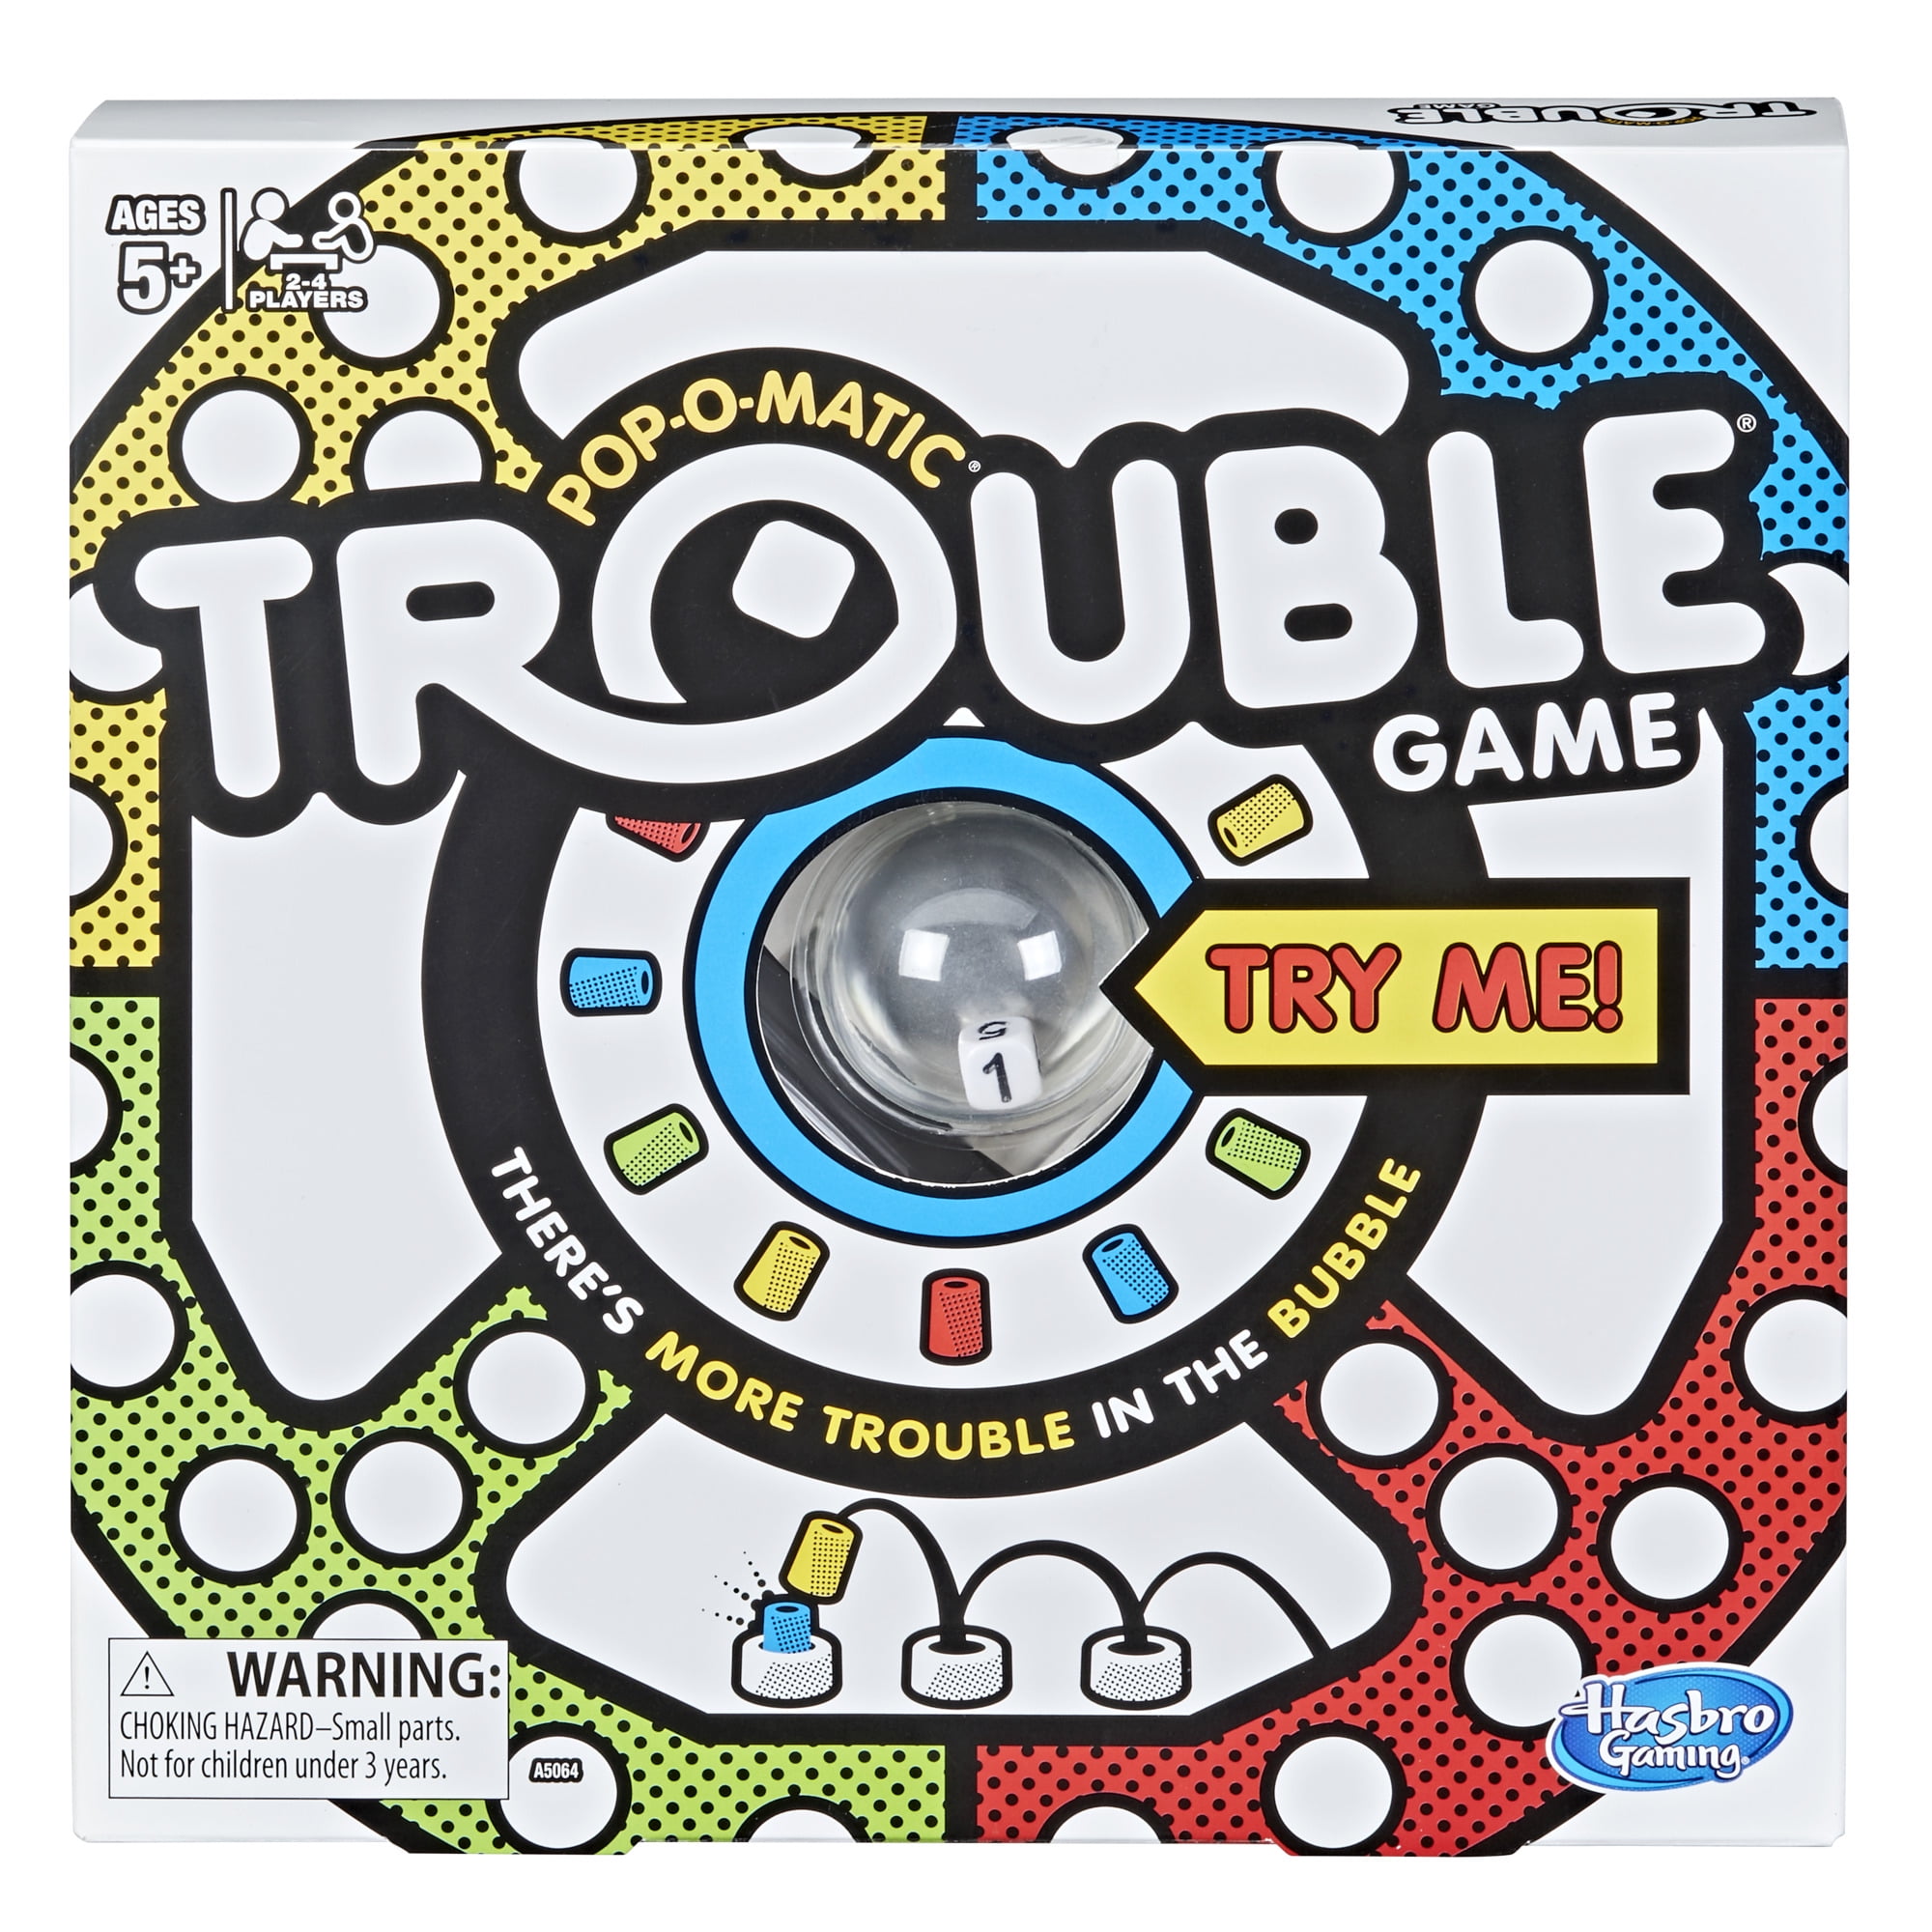 Trouble Kids Board Game, Pop-o-Matic, Family Board Games for Kids